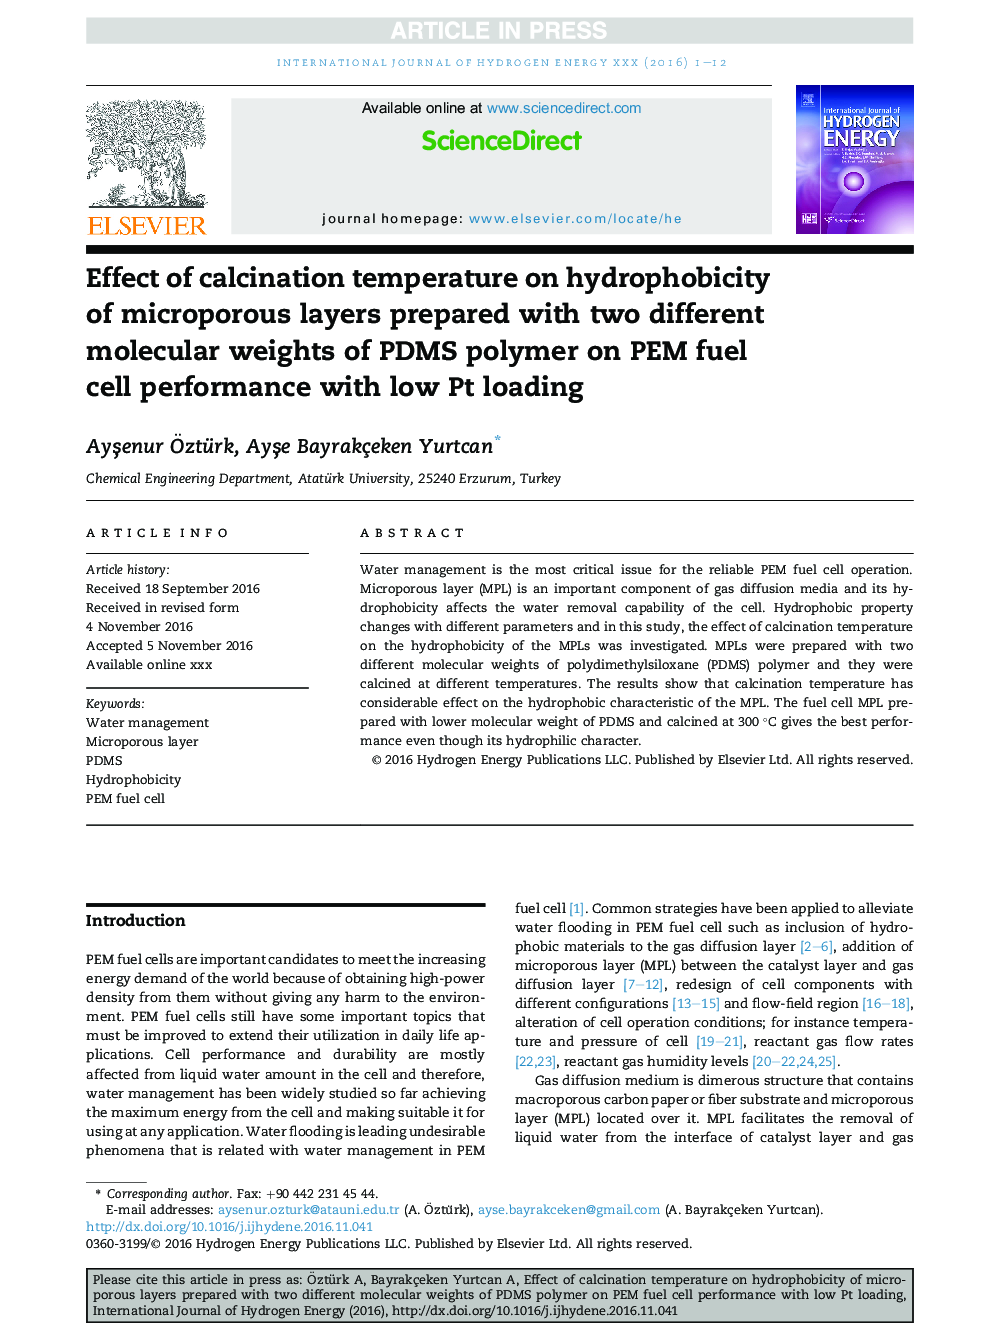 Effect of calcination temperature on hydrophobicity of microporous layers prepared with two different molecular weights of PDMS polymer on PEM fuel cell performance with low Pt loading